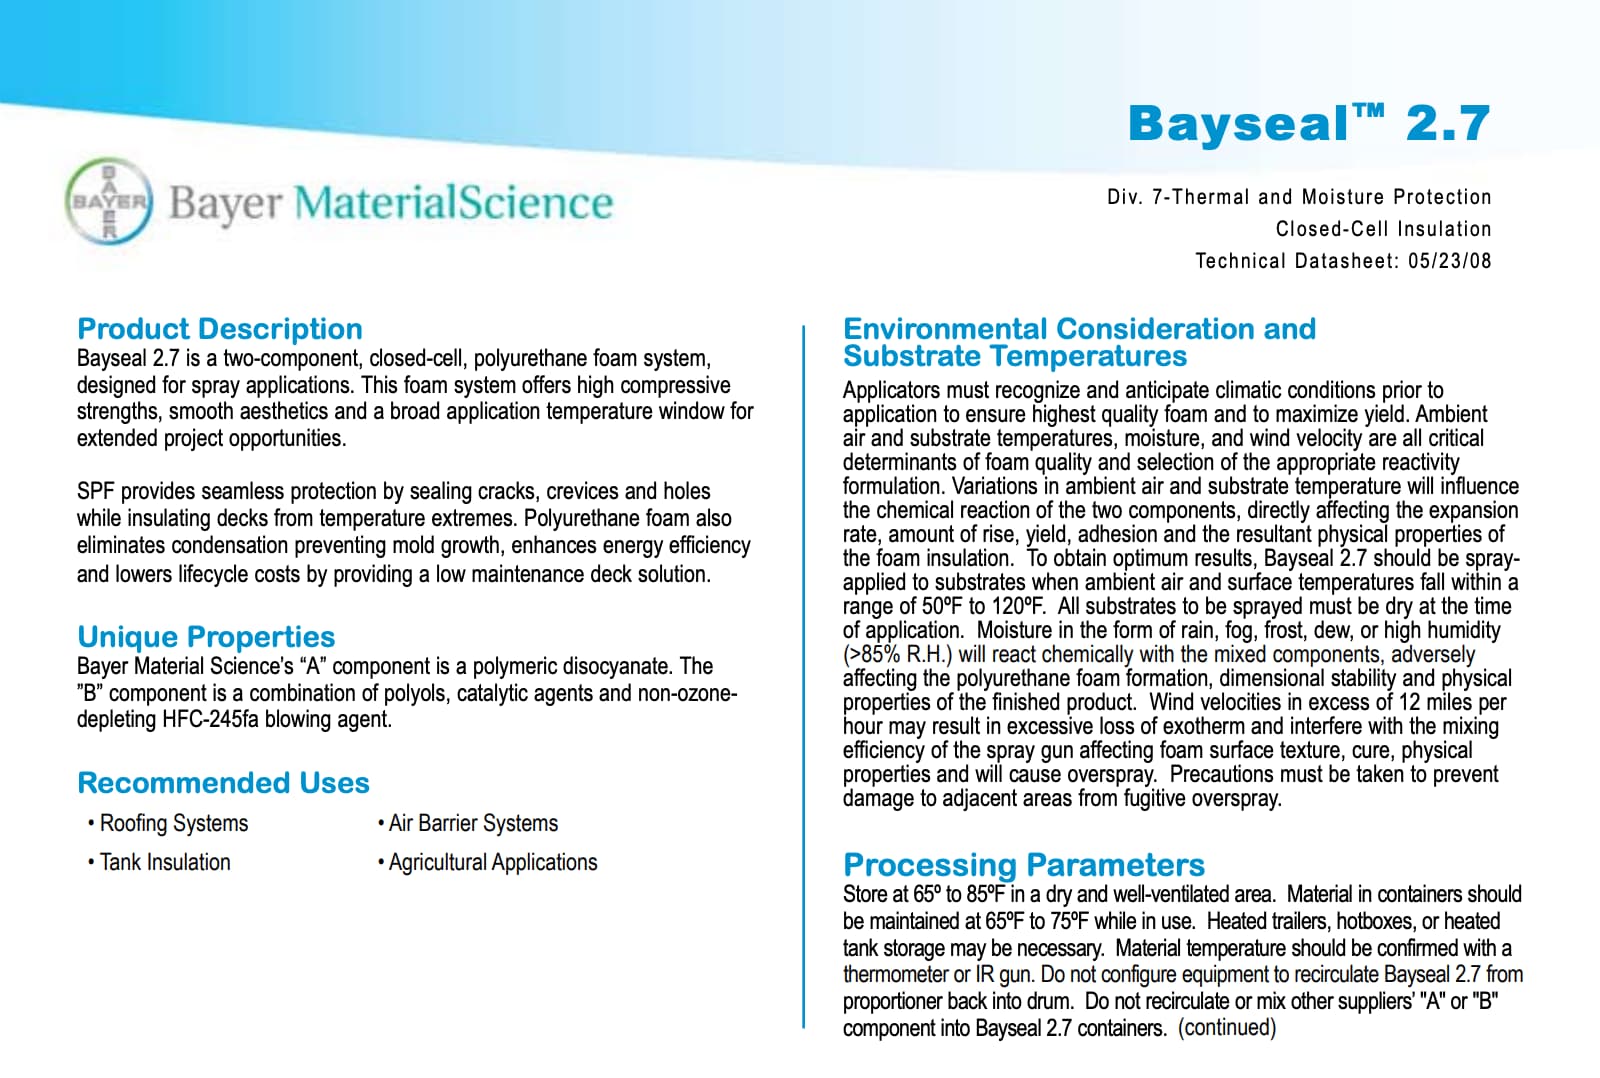 Bay Systems Bayseal 2.7 technical information cover photo